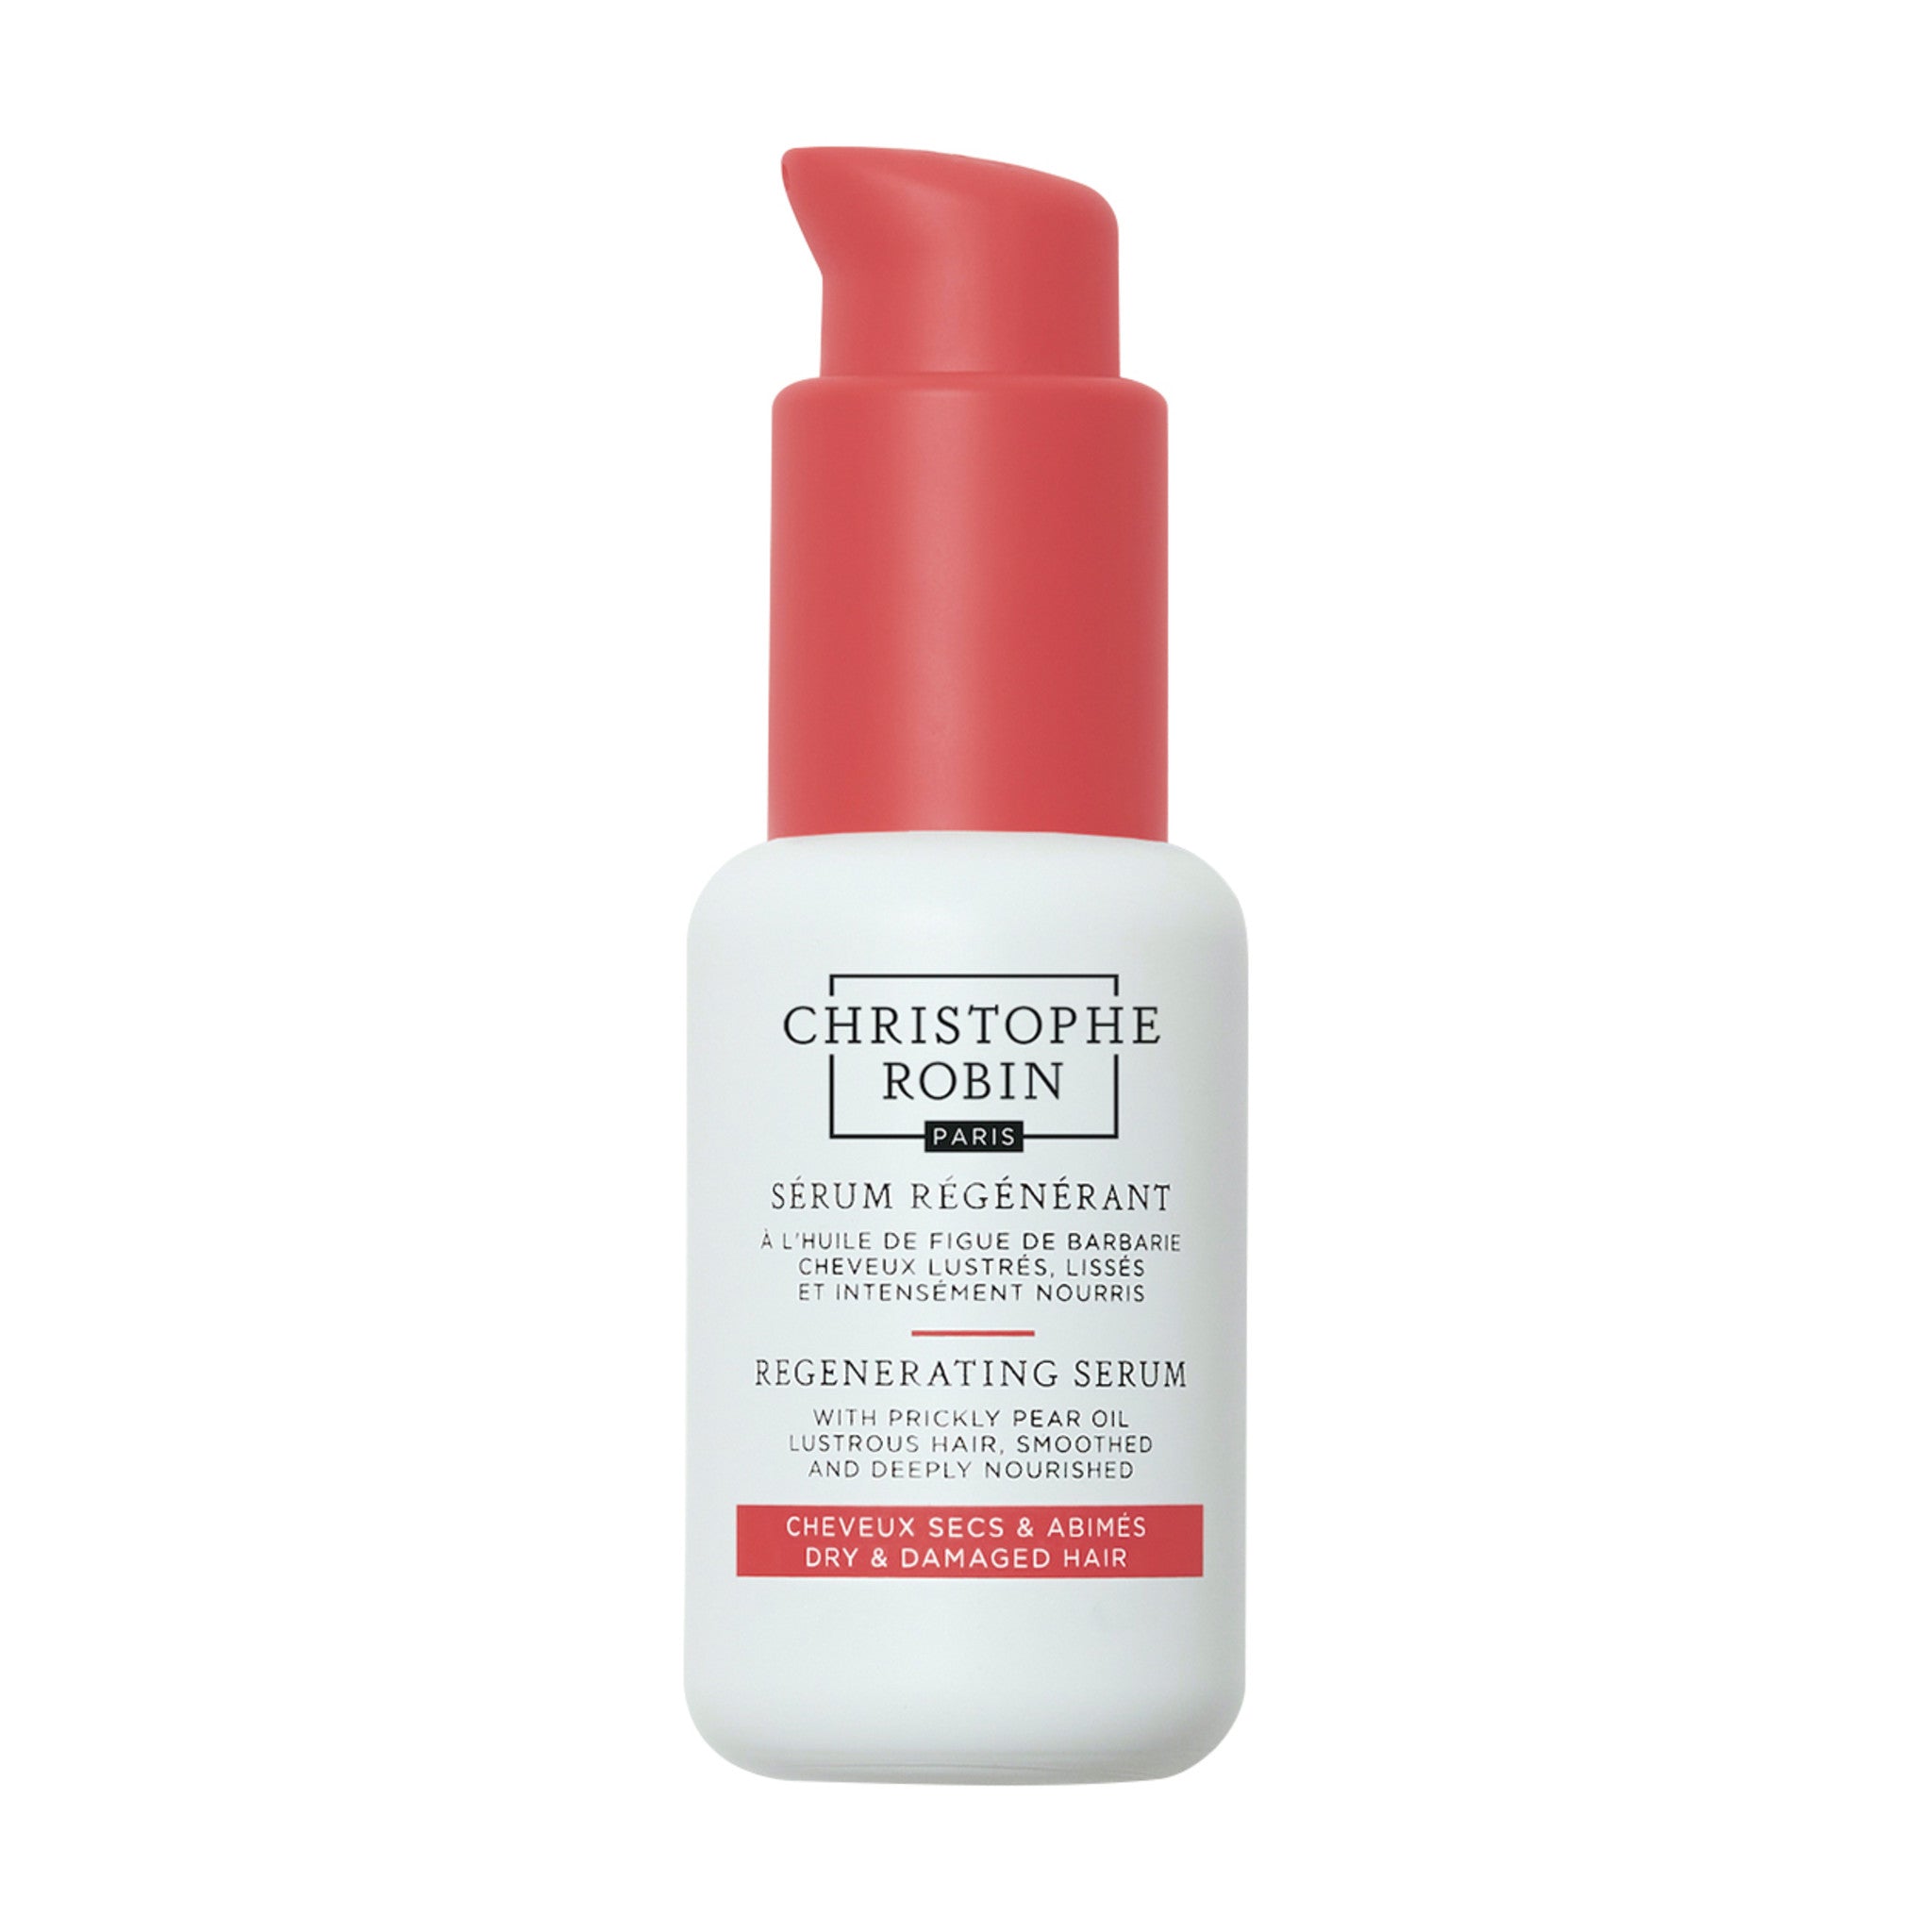 Christophe Robin Regenerating Serum With Prickly Pear oil main image.